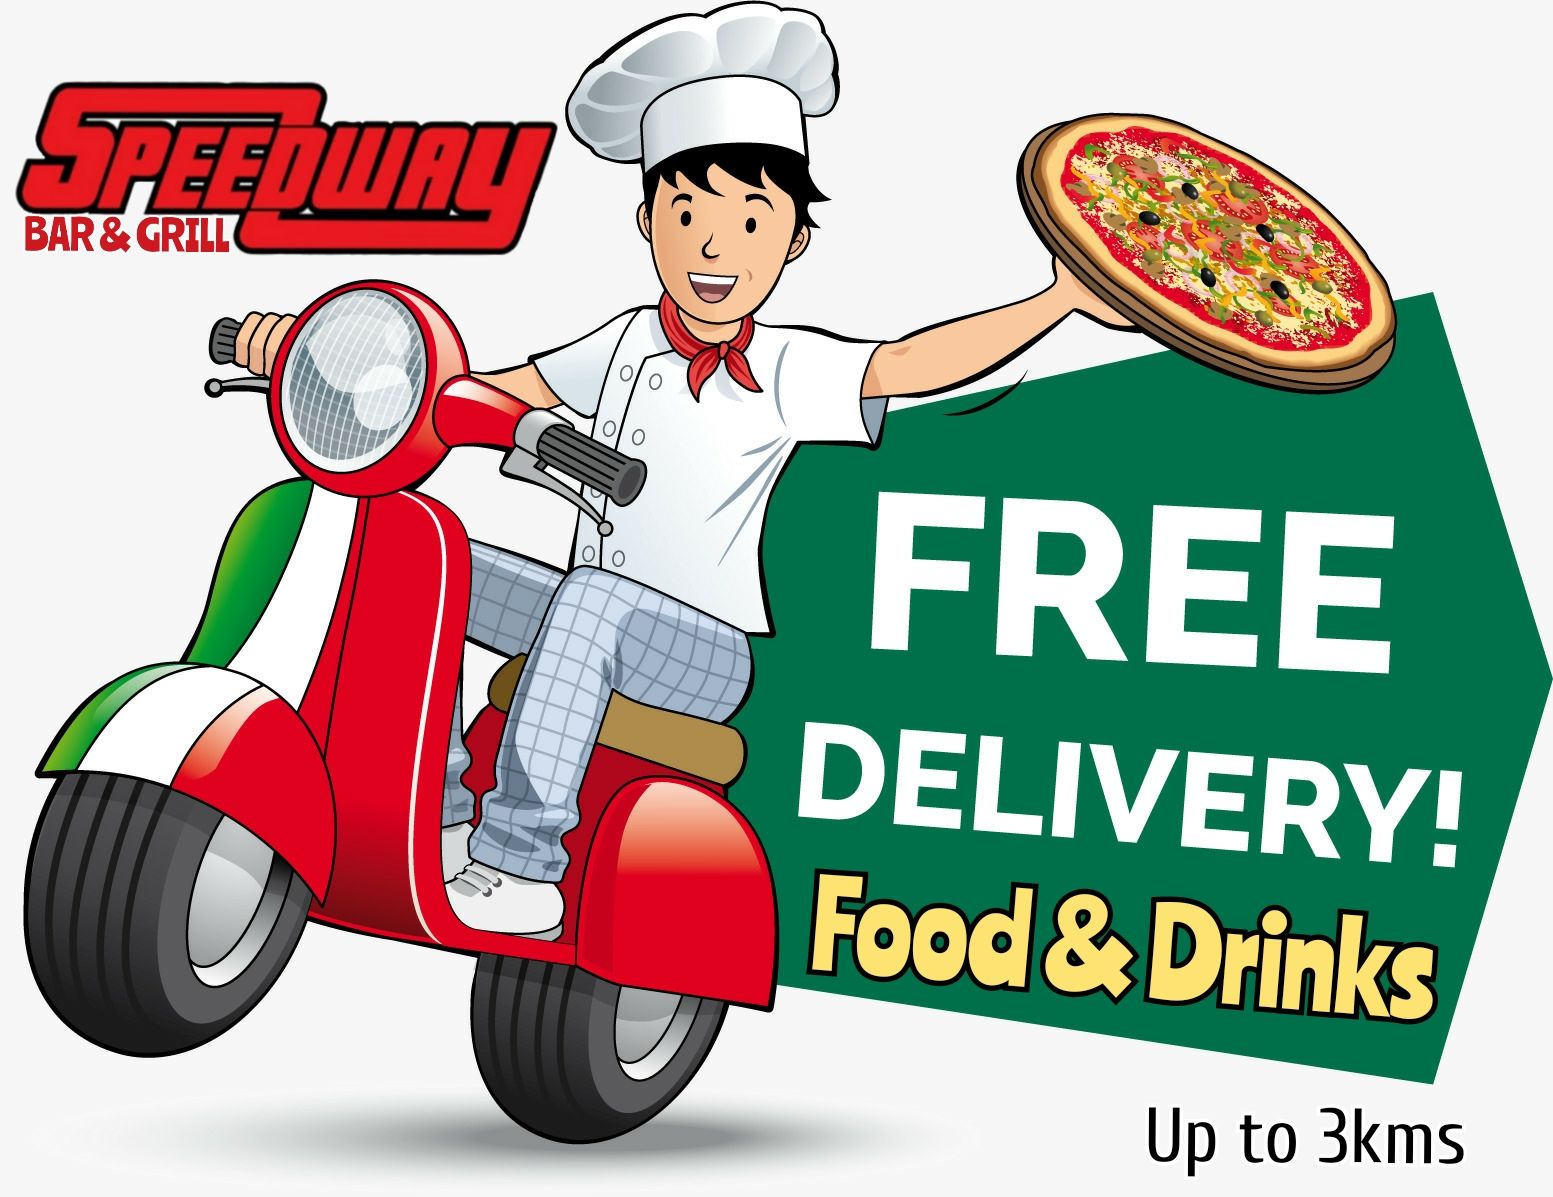 Food & Drinks Delivery